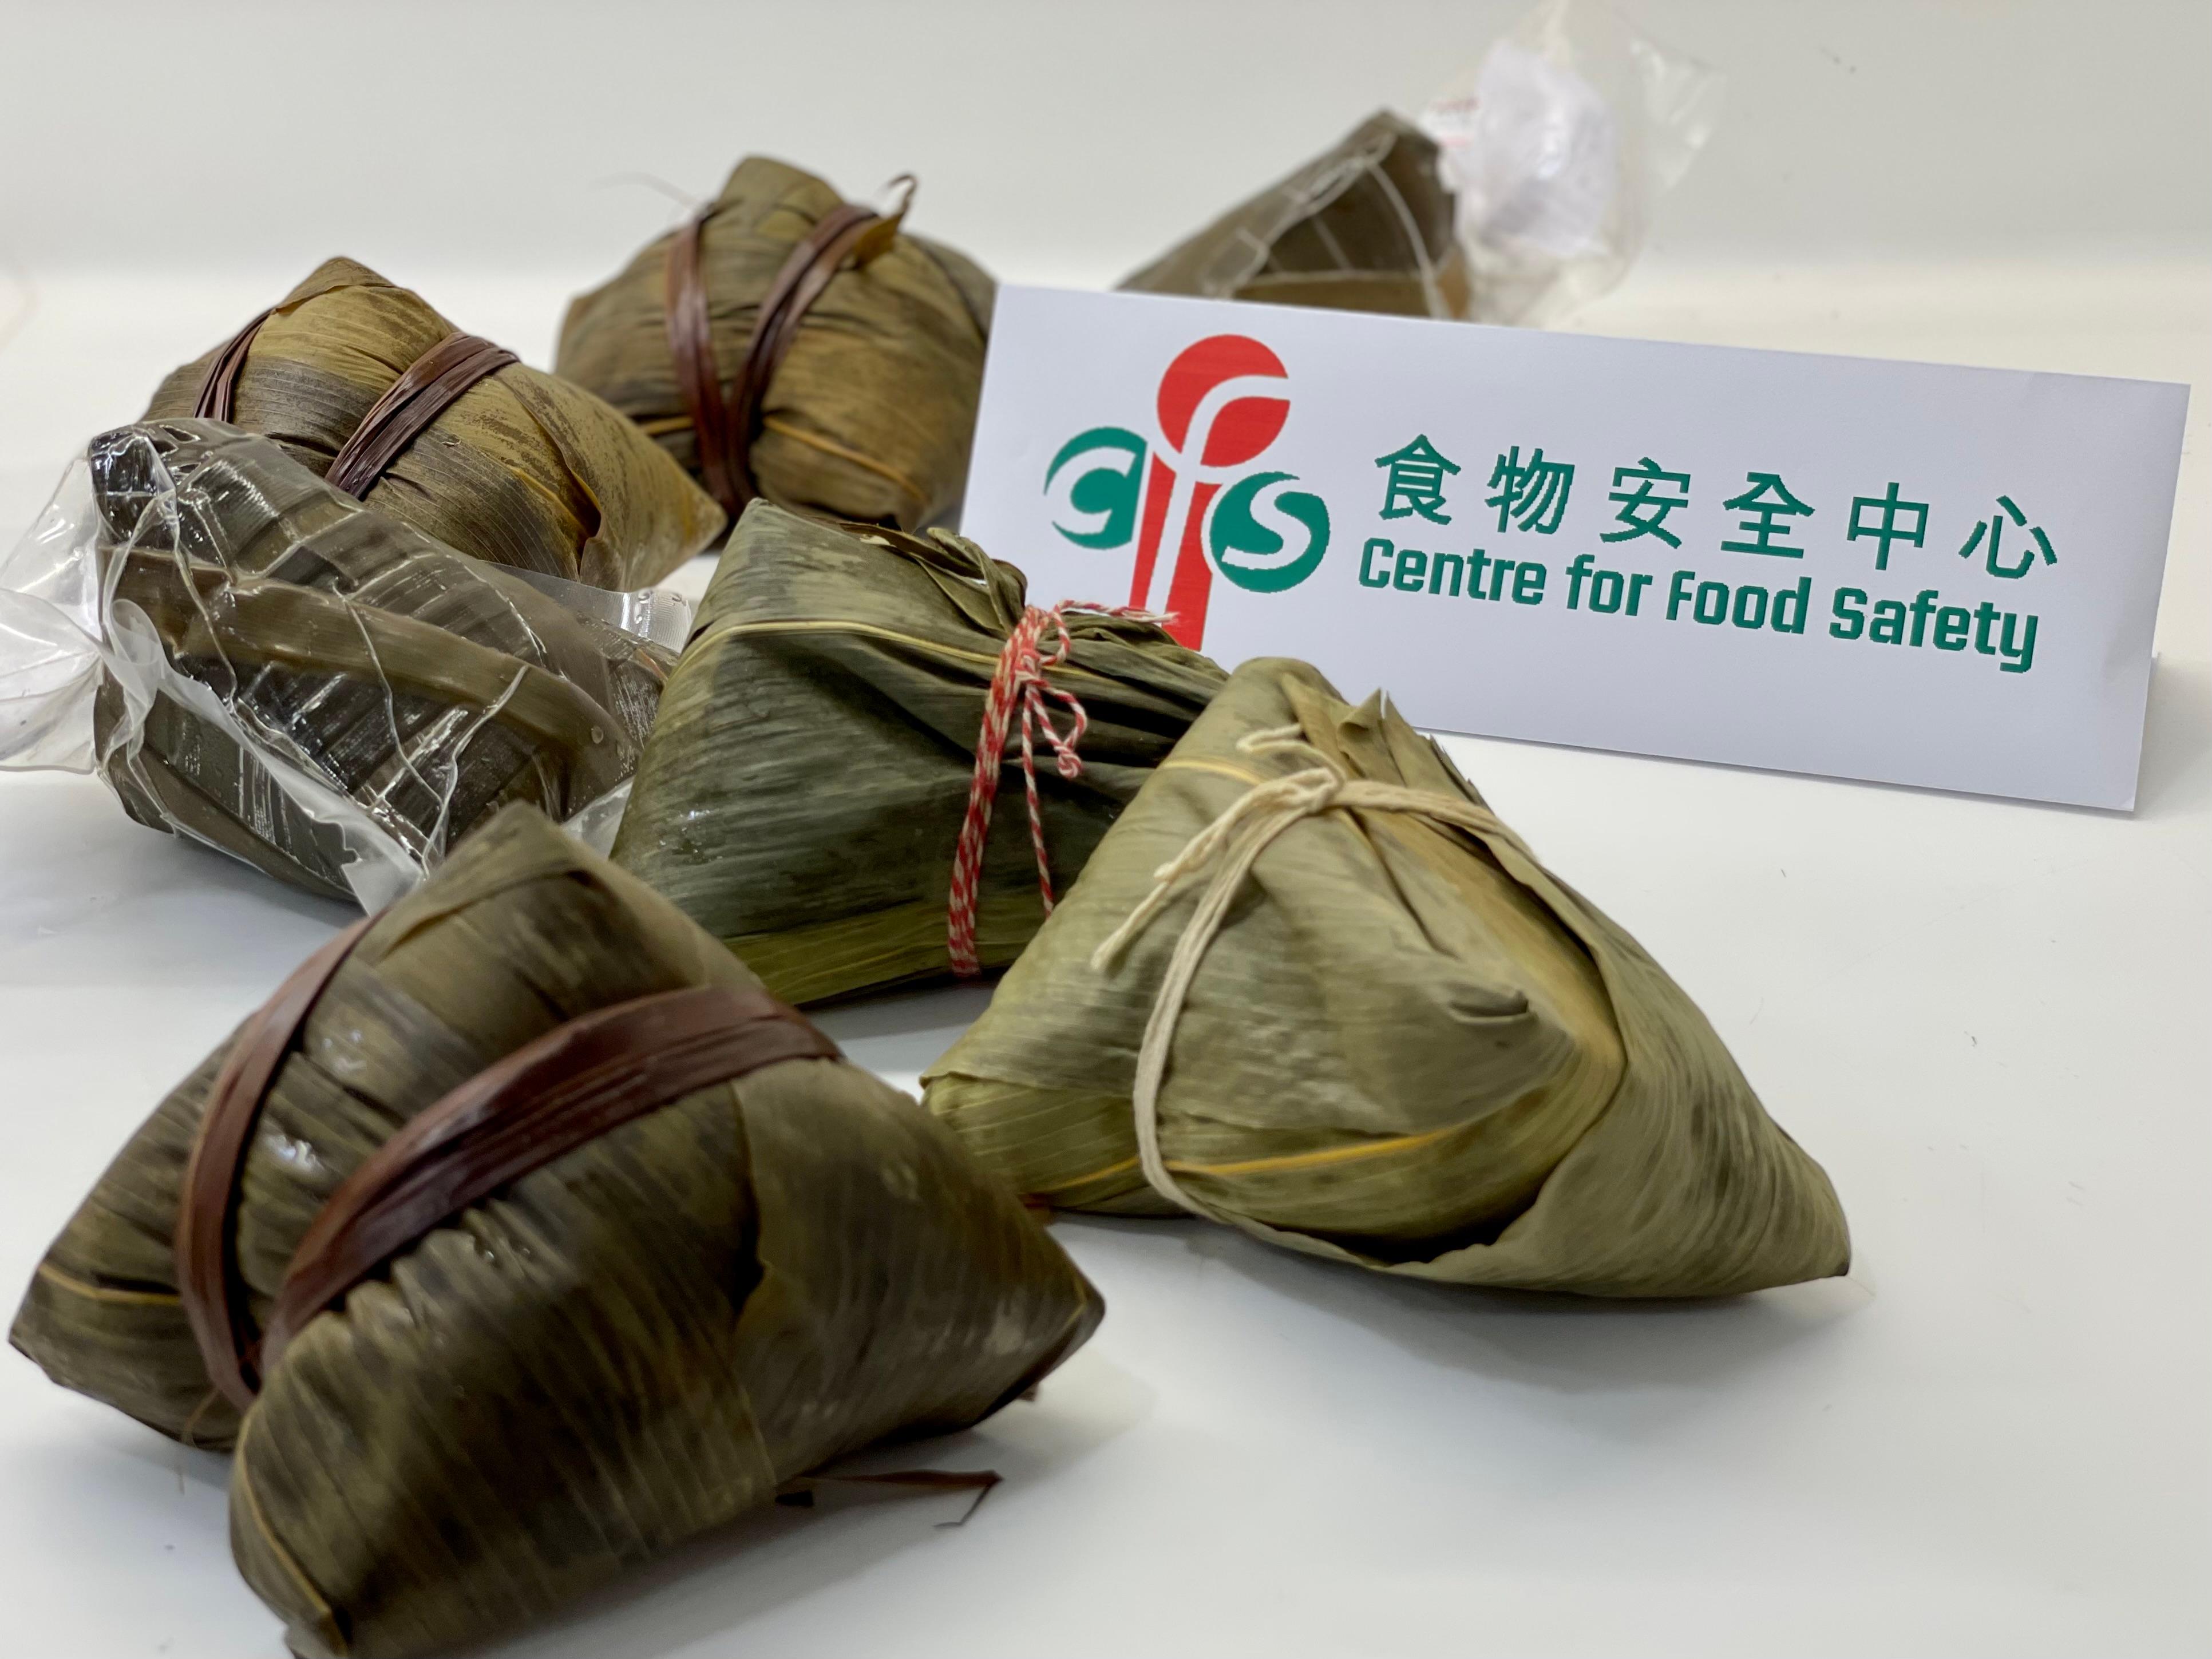 The Centre for Food Safety of the Food and Environmental Hygiene Department today (May 26) announced the test results of the seasonal food surveillance project on rice dumplings (second phase). All 33 samples collected were satisfactory.